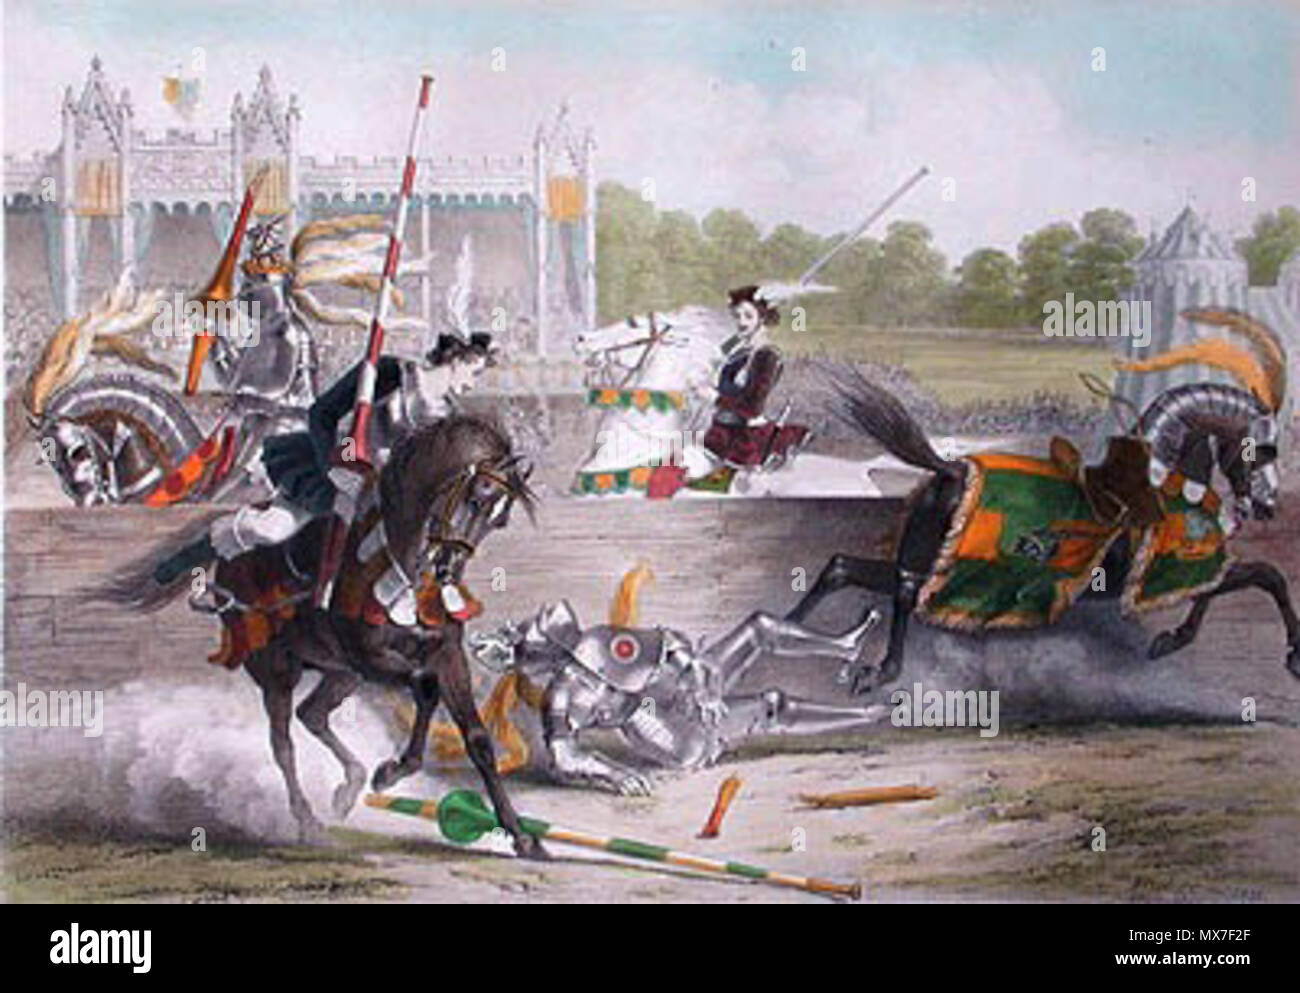 . The Joust Between The Lord of The Tournament and The Knight of The Red Rose, Eglinton tournament . 1839. corbould edward henry 143 Corbould edward henry thejoustbetweenthelordofthetournament Stock Photo